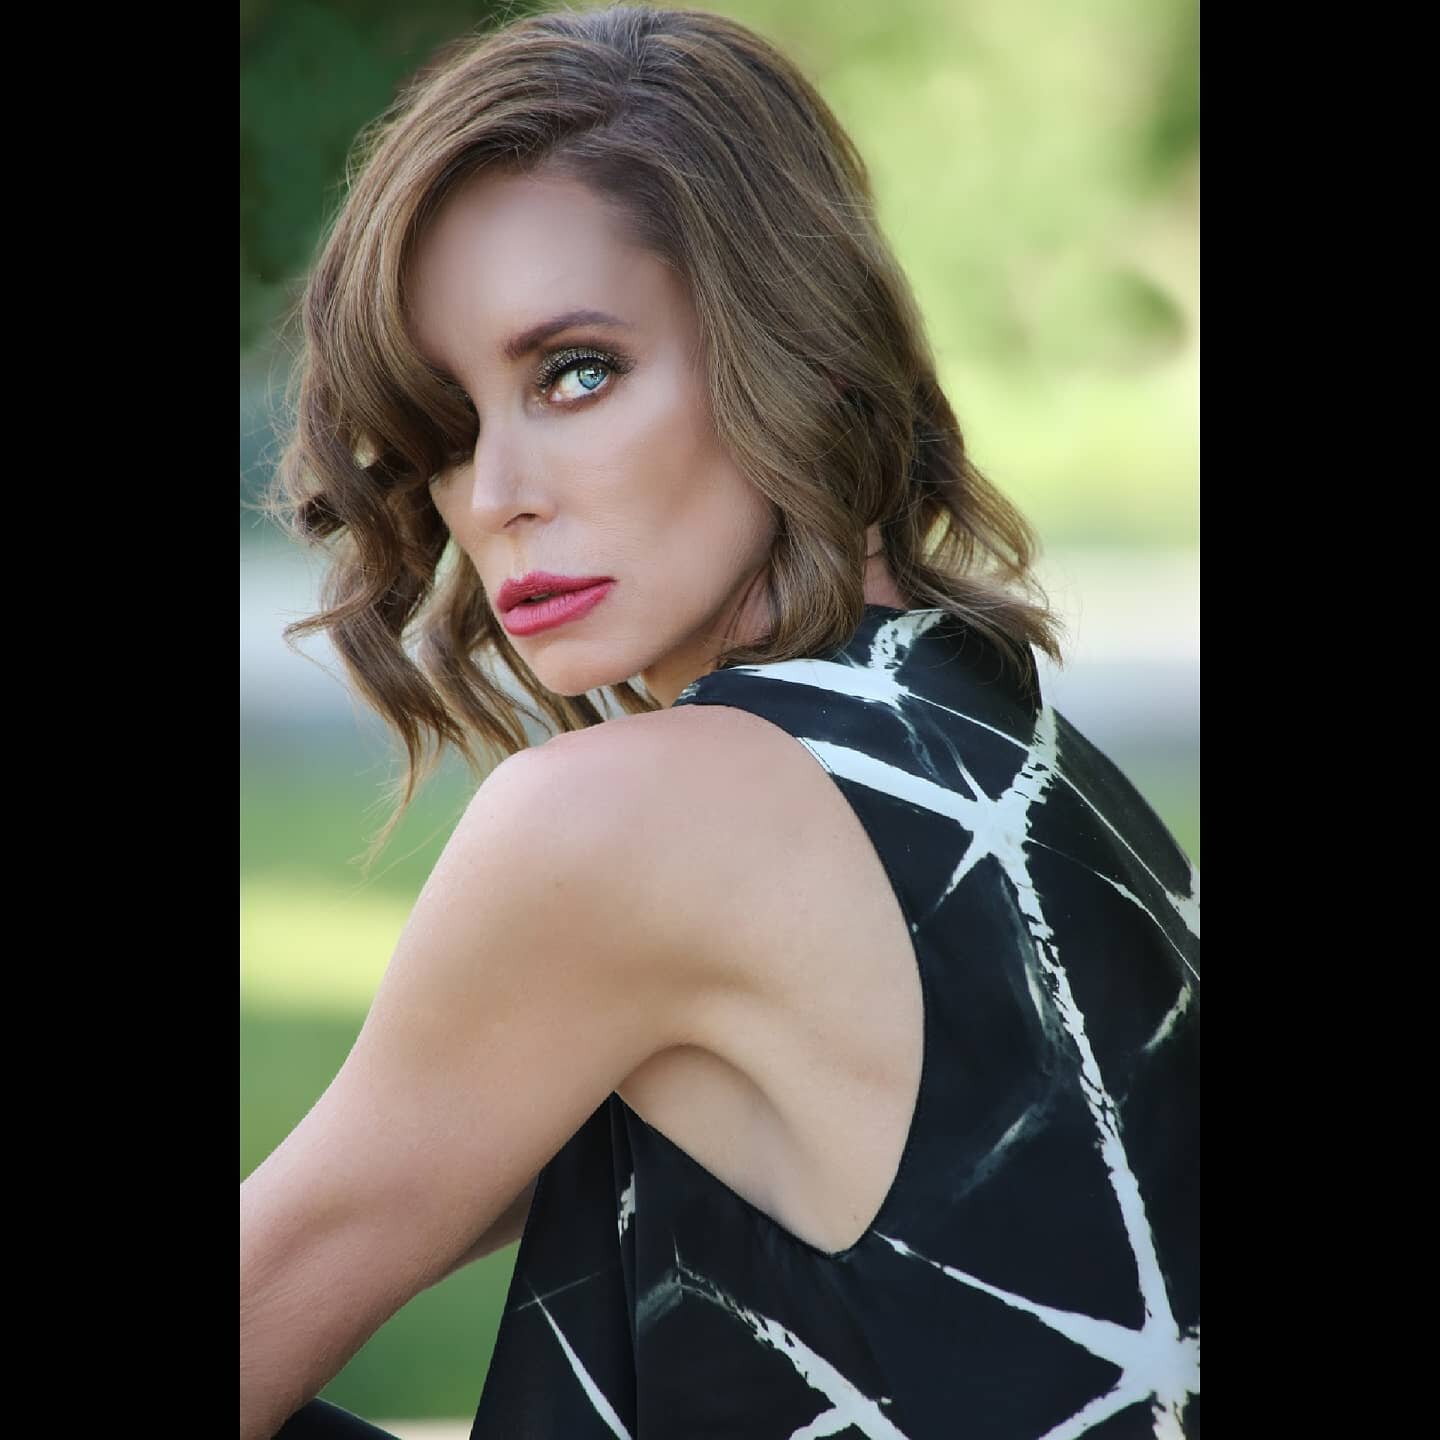 Our feature in Denver Colorado Luxury Magazine with: Model Stephanie Maner, Designer Steve Sells, Poshtography Assistant Marlene, Makeup by Savannah Appel, &amp; Hair by Mia Bethany Acers. 
.
Special thanks to Trisha Ventker @denvercoloradoluxurymaga